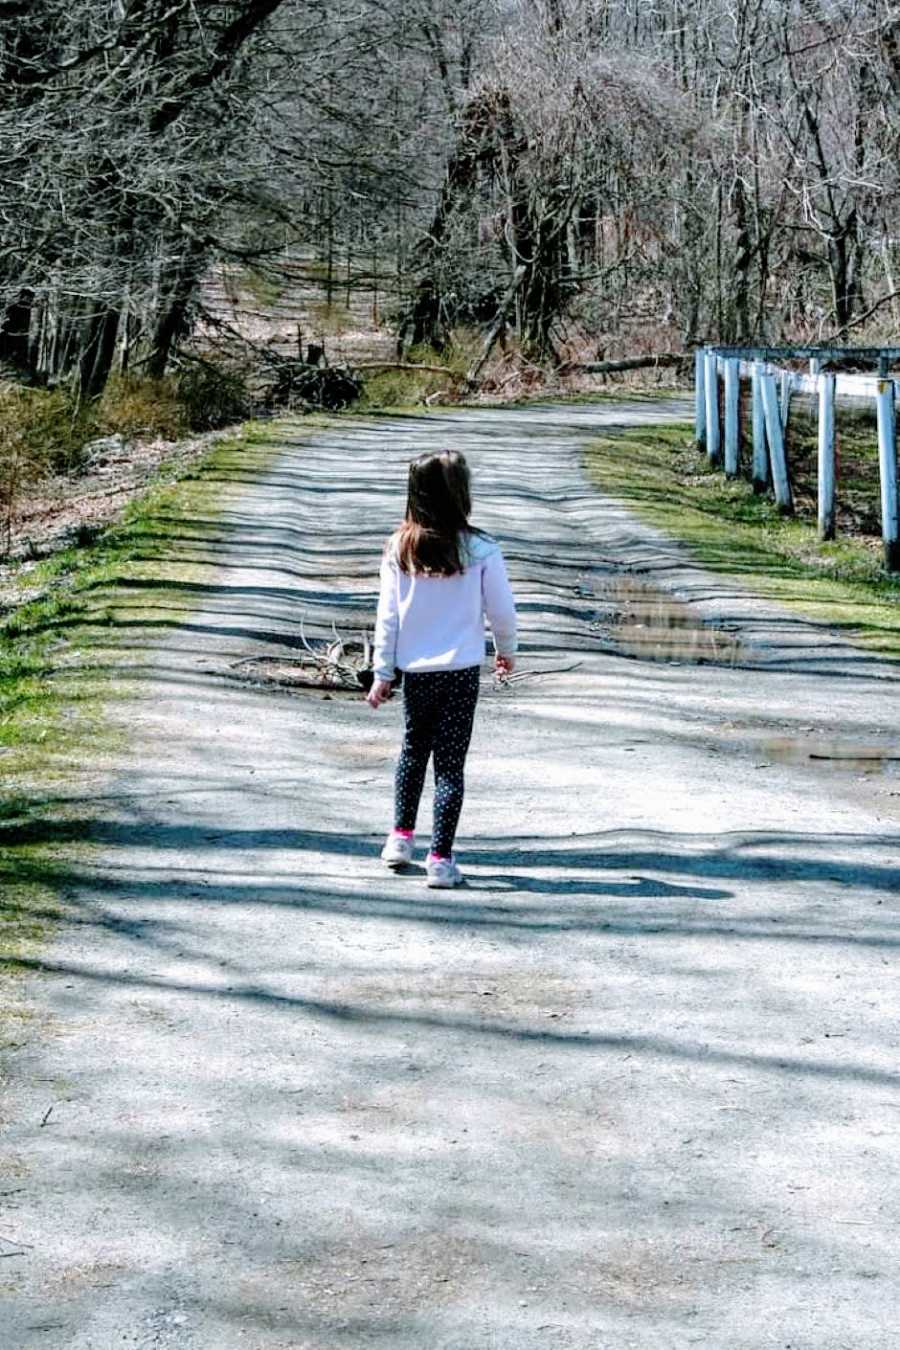 Girl mom snaps photo of her daughter running ahead of her, letting her lead the way